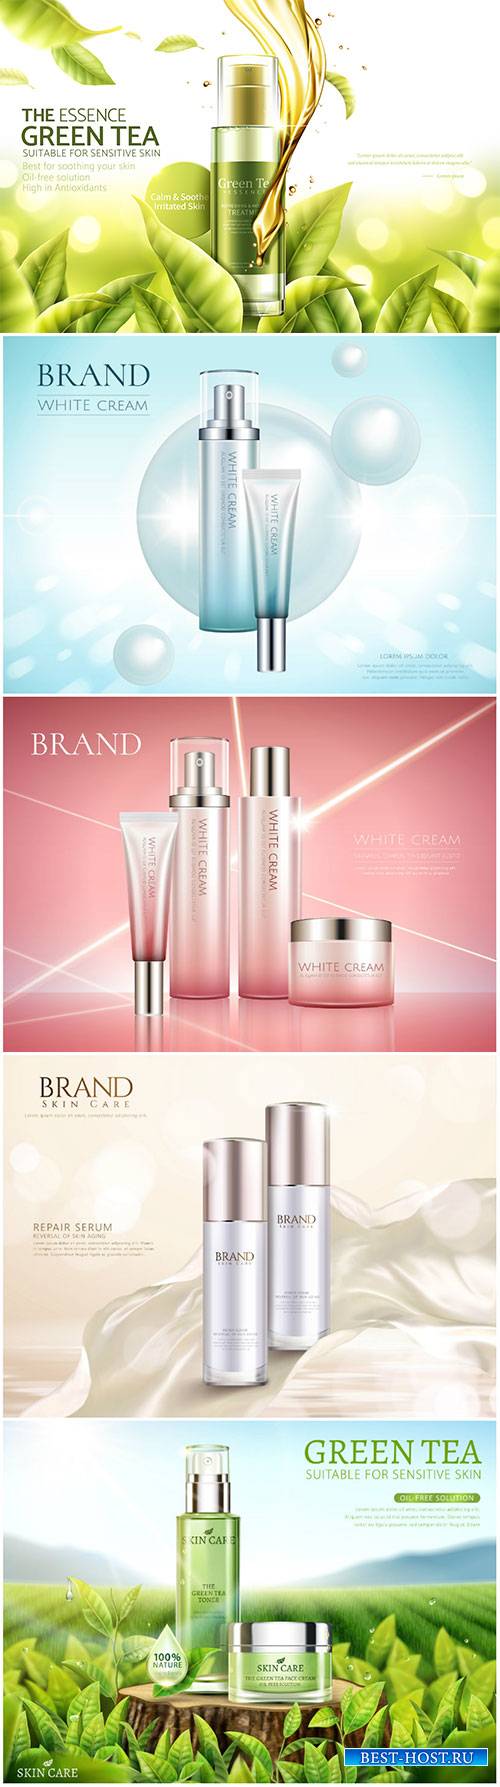 Cosmetic product set in 3d vector illustration